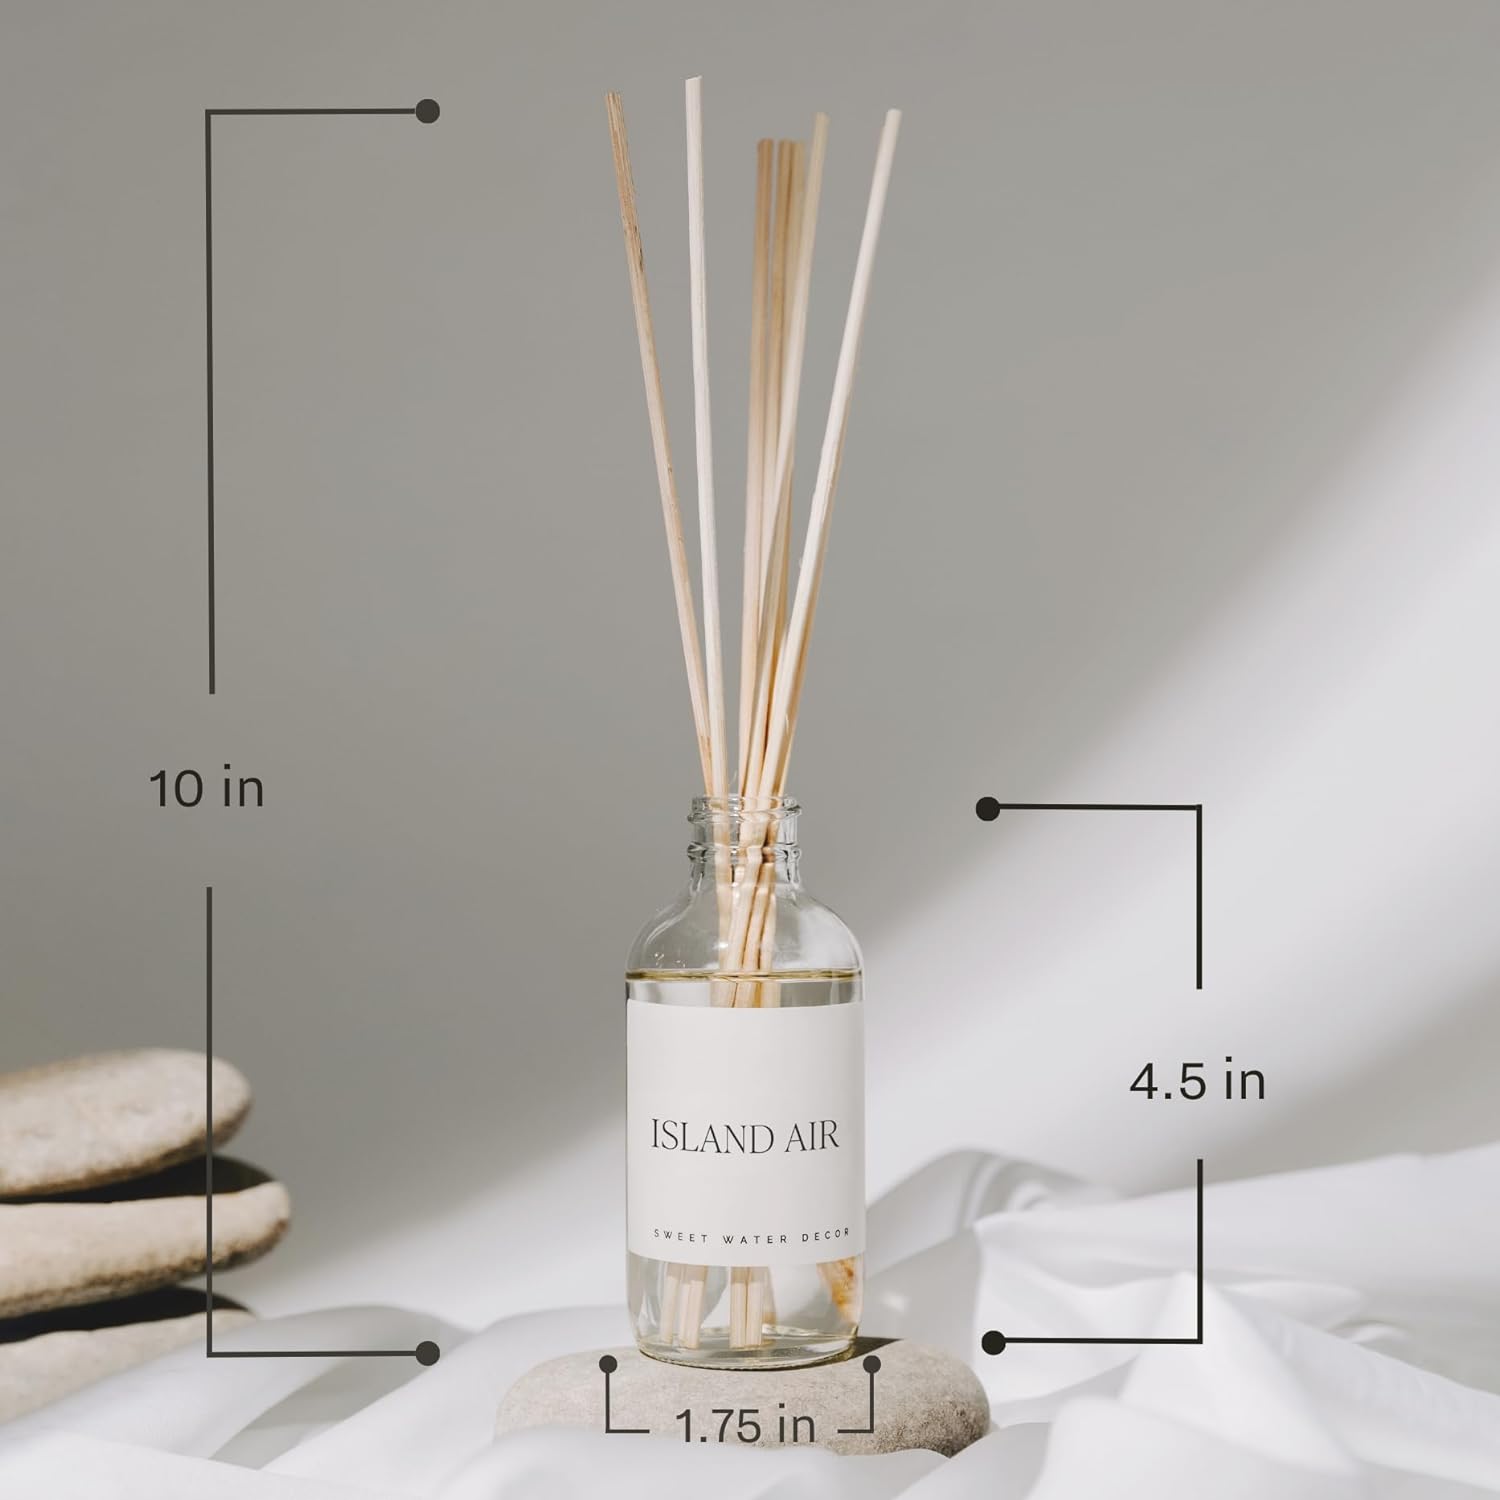 Sweet Water Decor Salt & Sea Reed Diffuser Set - Sea Salt Citrus & Musk Amber Scent Diffuser - Reed Diffusers for Home with Long Lasting Fragrance - Non-Toxic Oil Reed Diffuser - Made in the USA